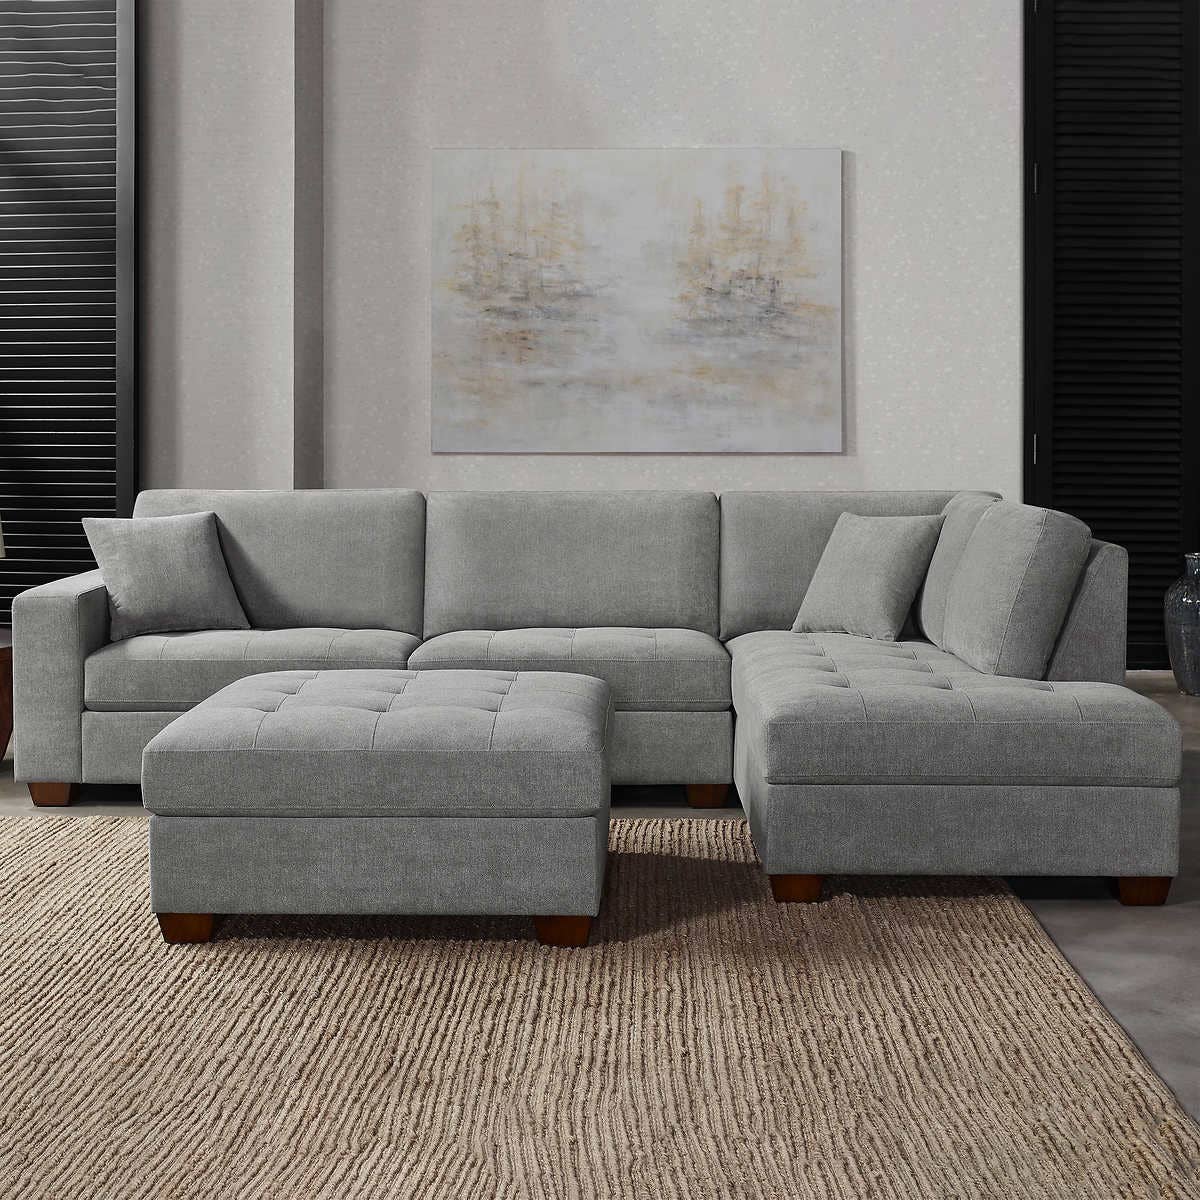 NEW - Costco - Thomasville Miles Fabric Sectional with Storage Ottoman - Retail $1799